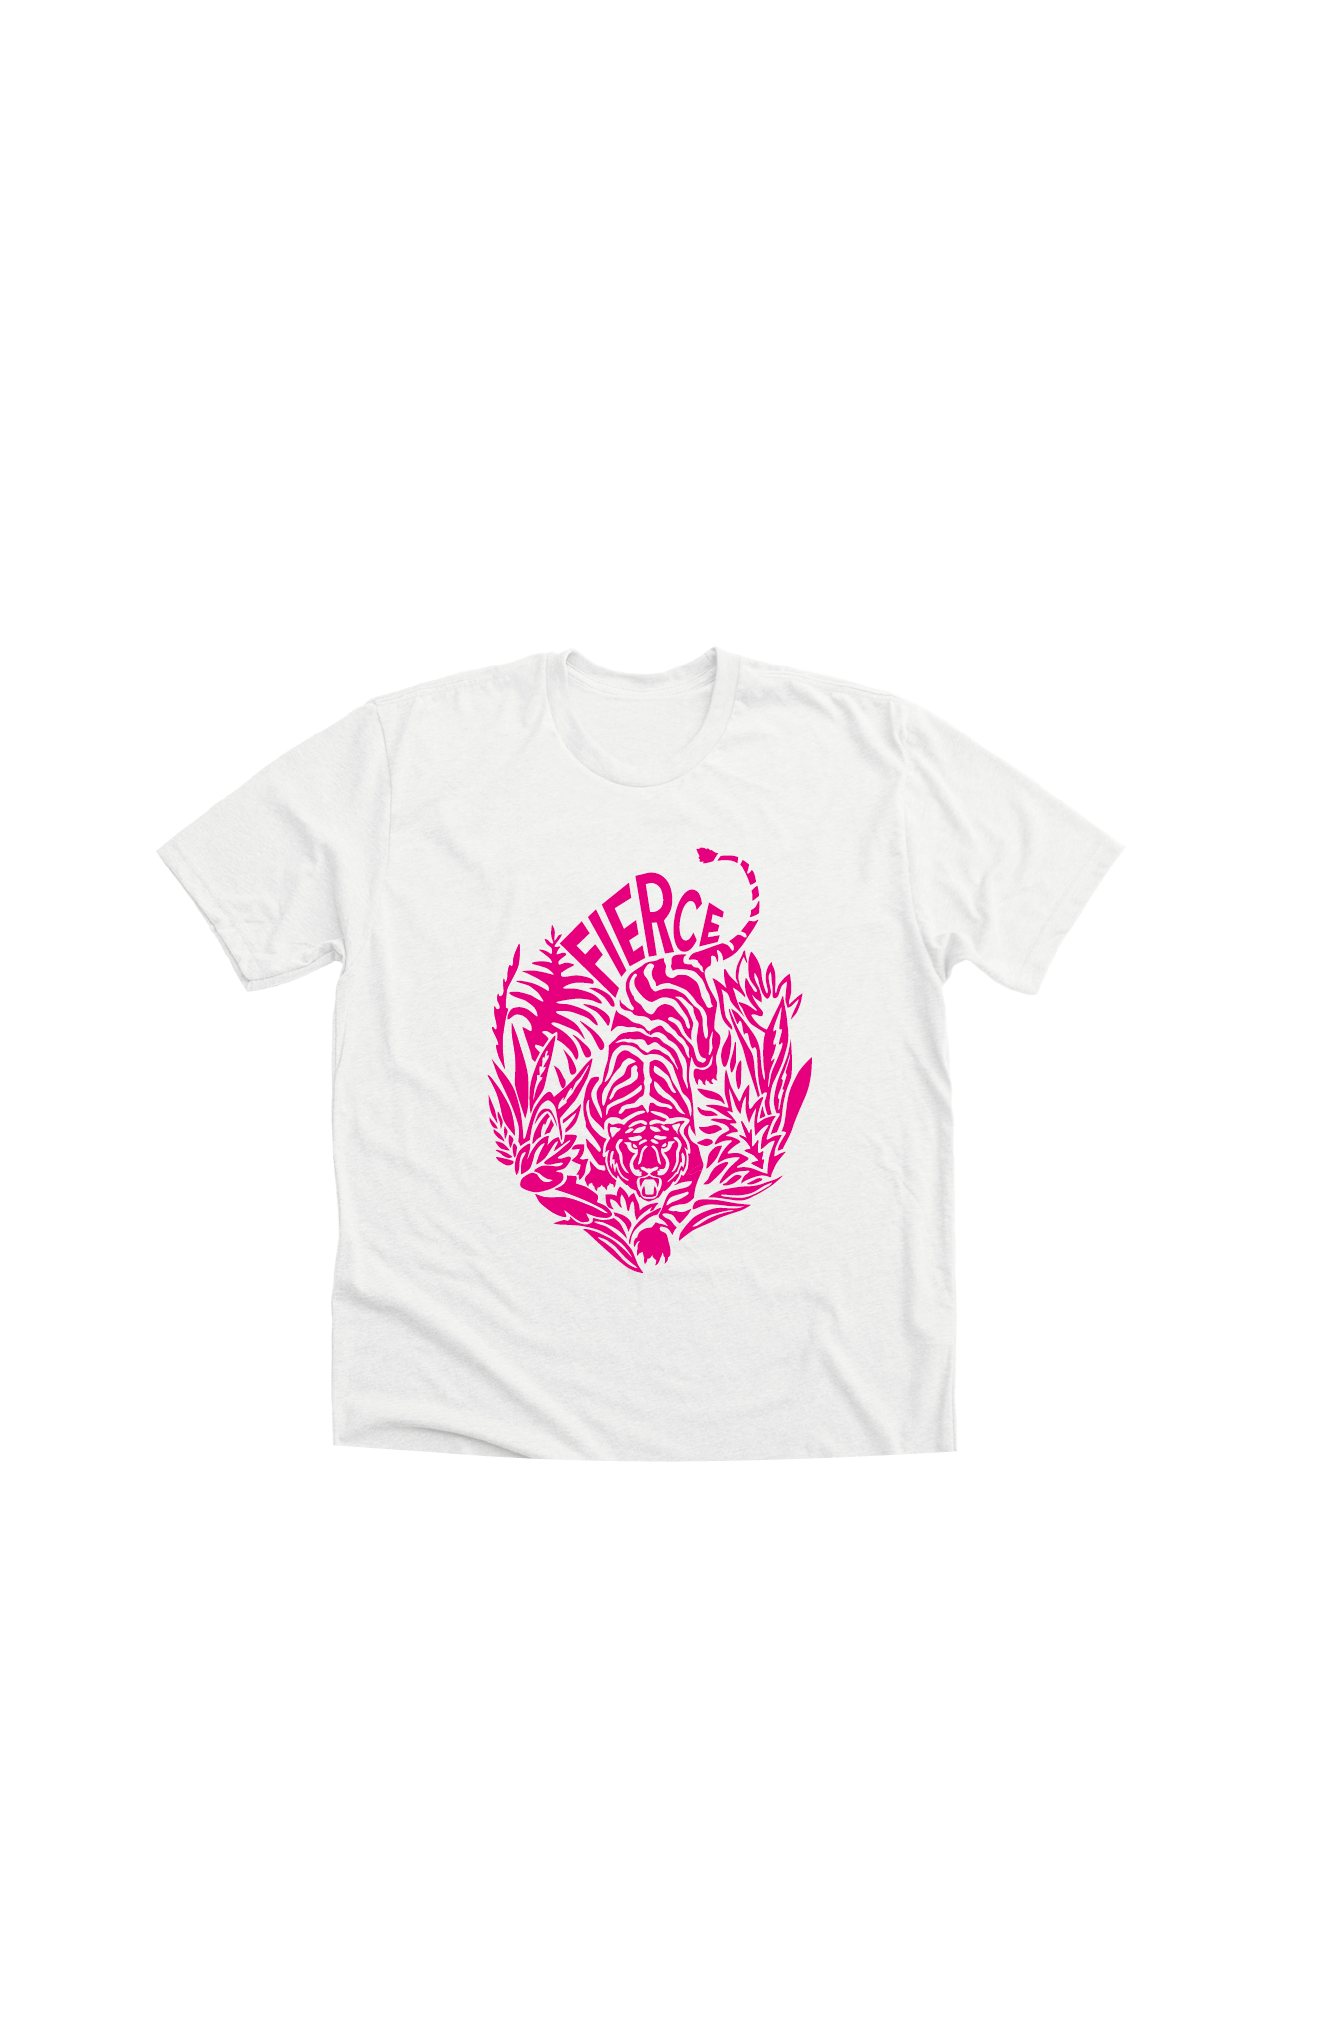 Ladies white crop top with a light neon pink print of a tiger on the front